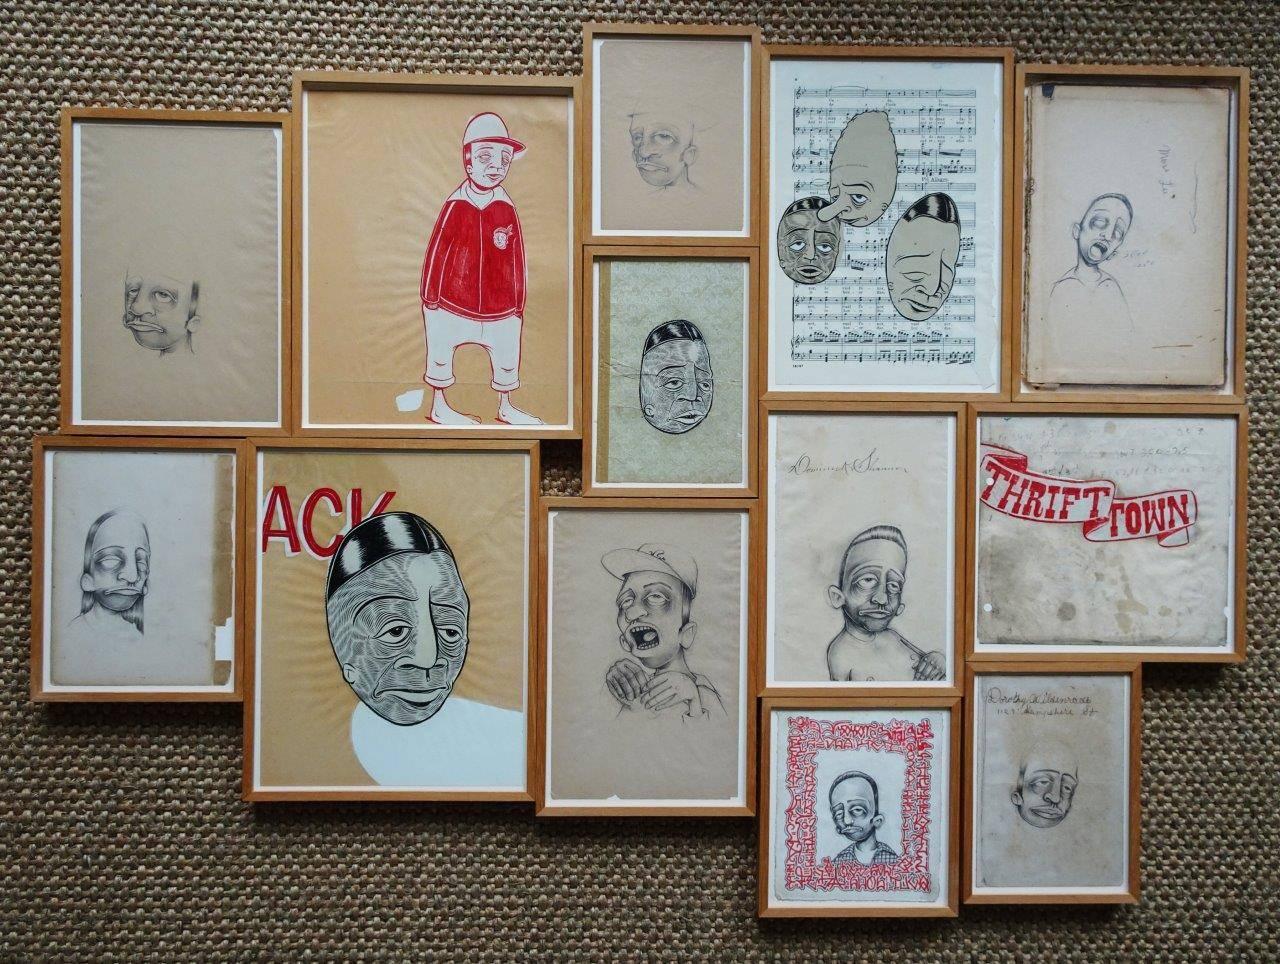 Barry McGee (1966, San Francisco), untitled, 1997. Drawing installation of 13 small drawings in pencil, ink, gouache and felt-tip pen on paper.
Each drawing: Approximately 20 x 15 cm, total size 100 x 190 cm. Images of all the 13 artworks in the